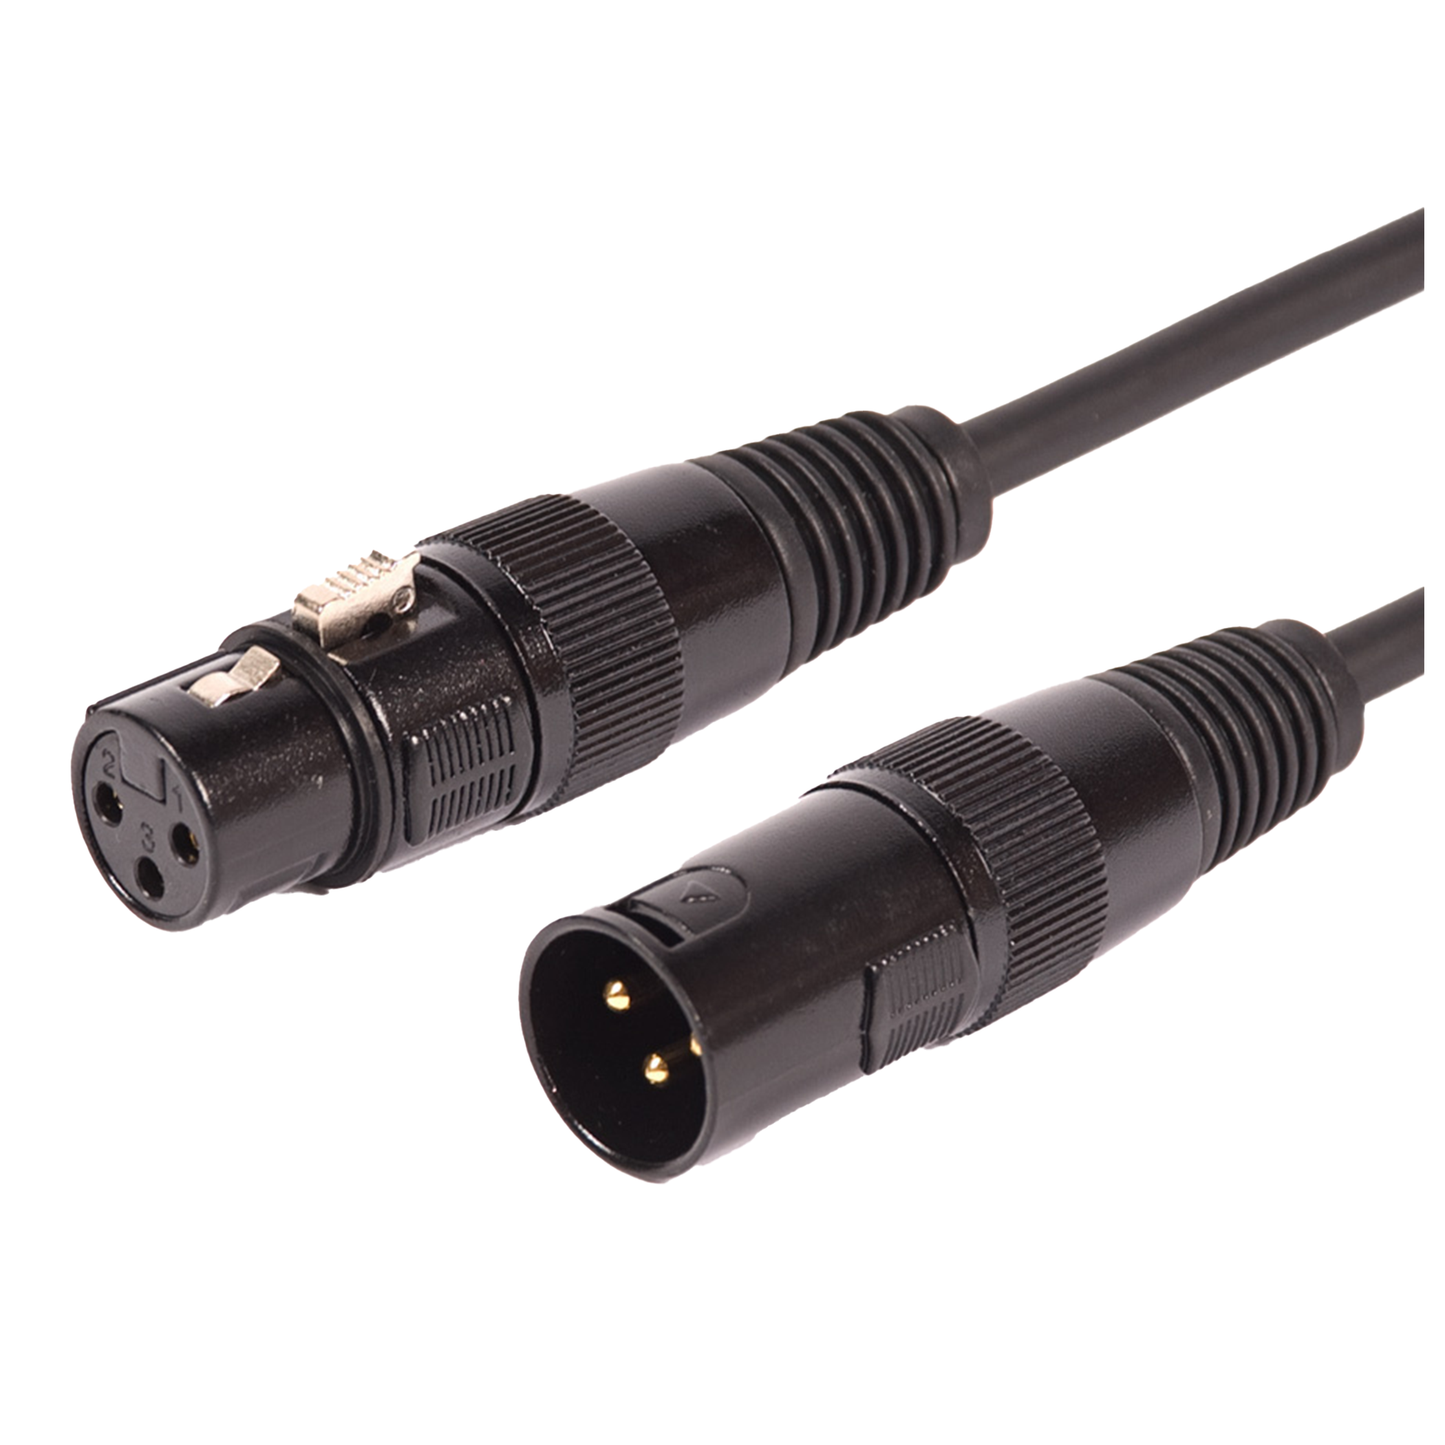 GAMMA 10ft 3-Pin DMX Cable